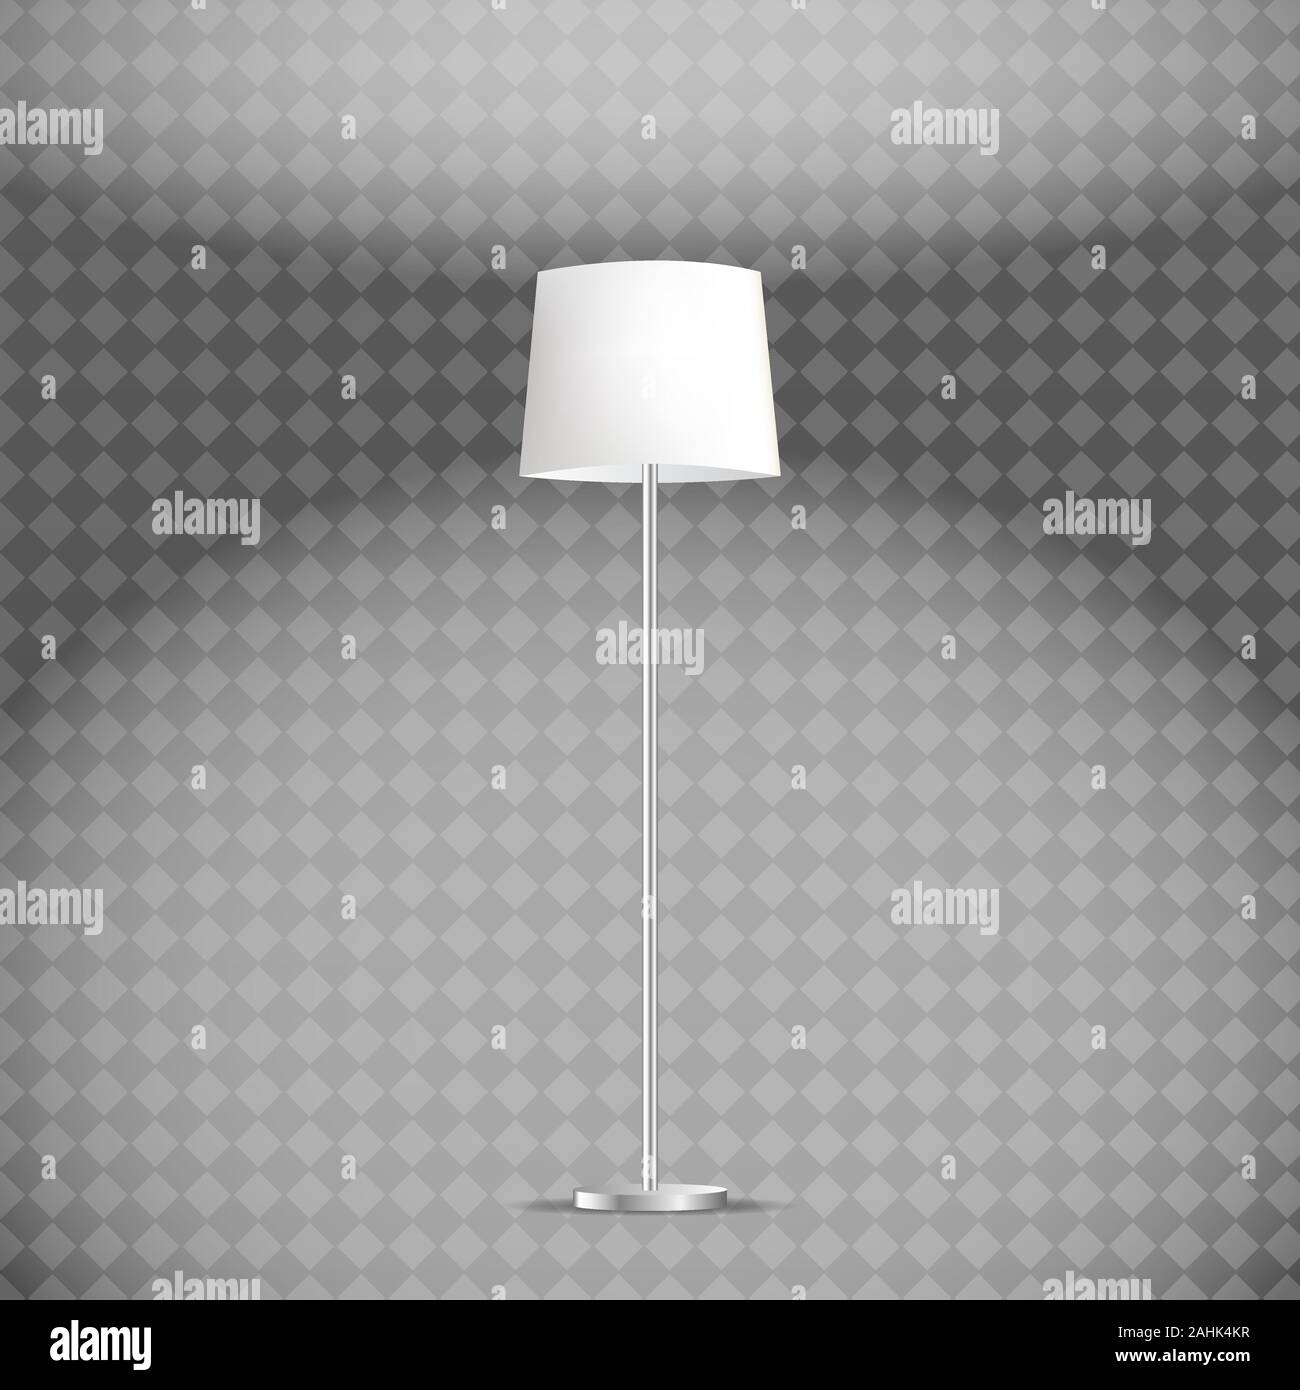 Vector 3d Realistic Render Illuminated Lamp Closeup Isolated on Transparent Background. Floor Lamp. Template of Electric Torchere for Interior Design, Stock Vector